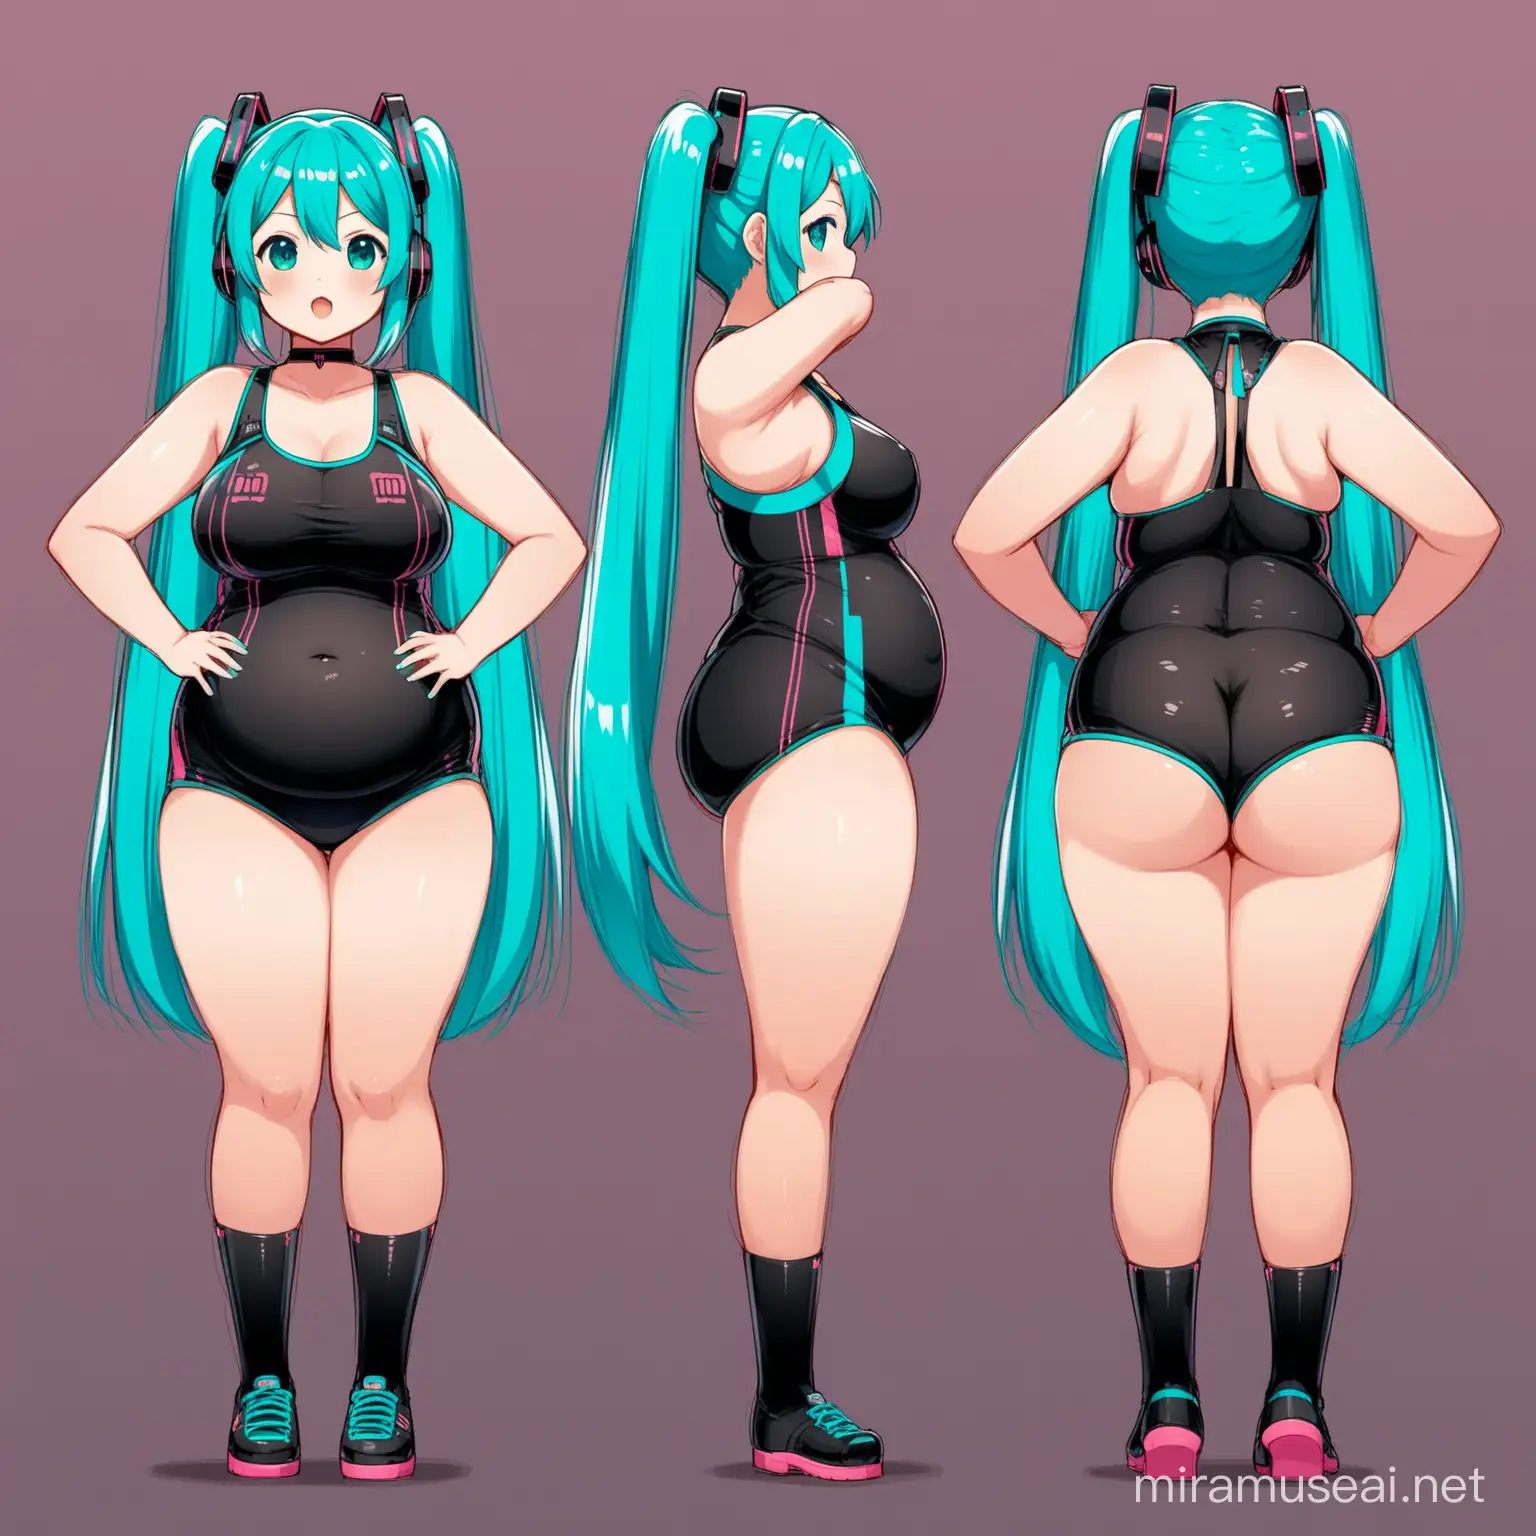 Chubby Hatsune Miku Character Design Sketches Front Side and Back View